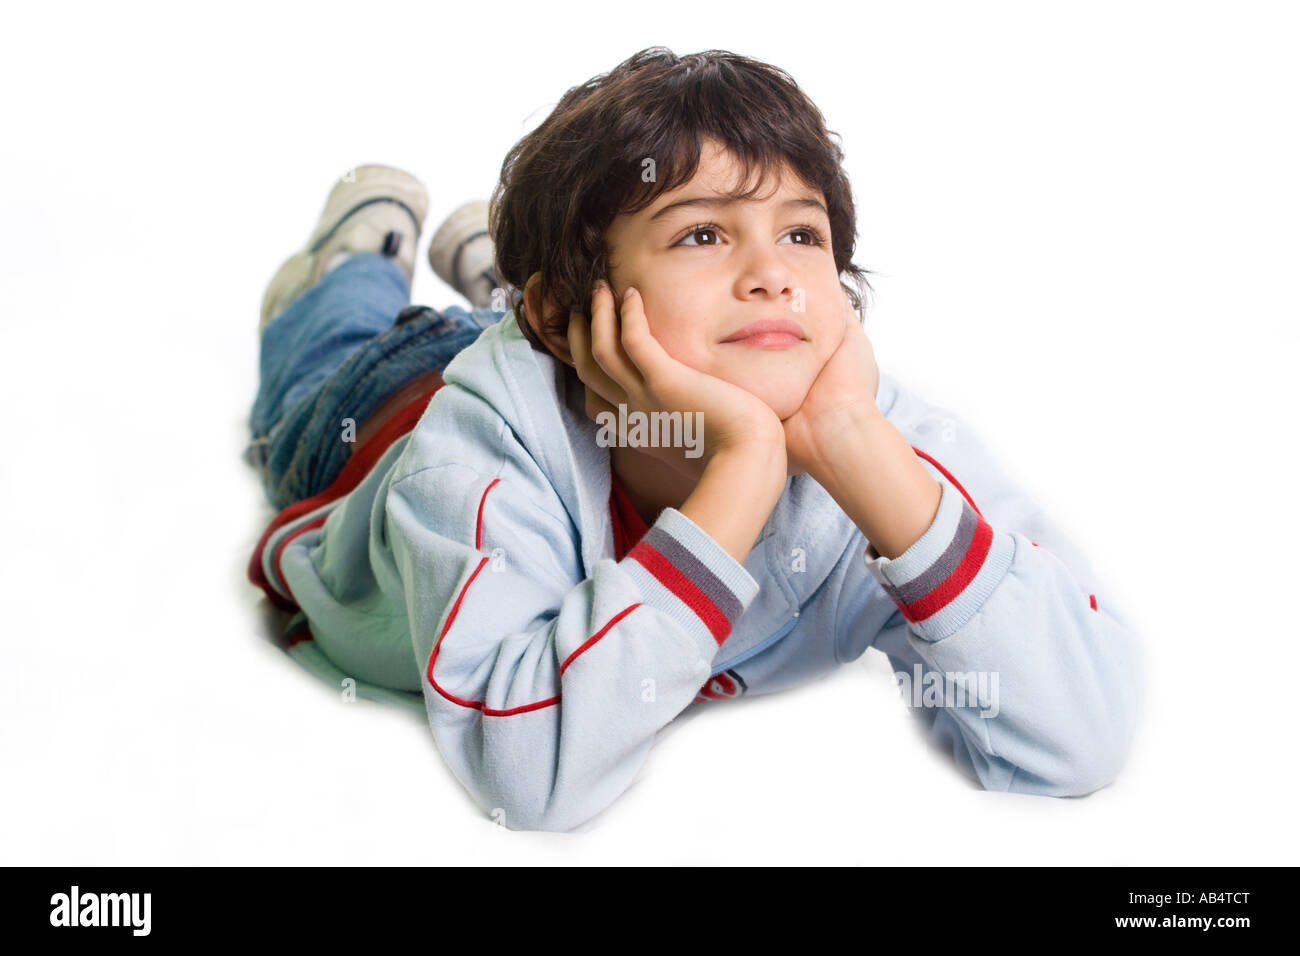 Young boy laid down on the floor in a thoughtful pose like he was wishing something Studio shot isolated on white background Stock Photo